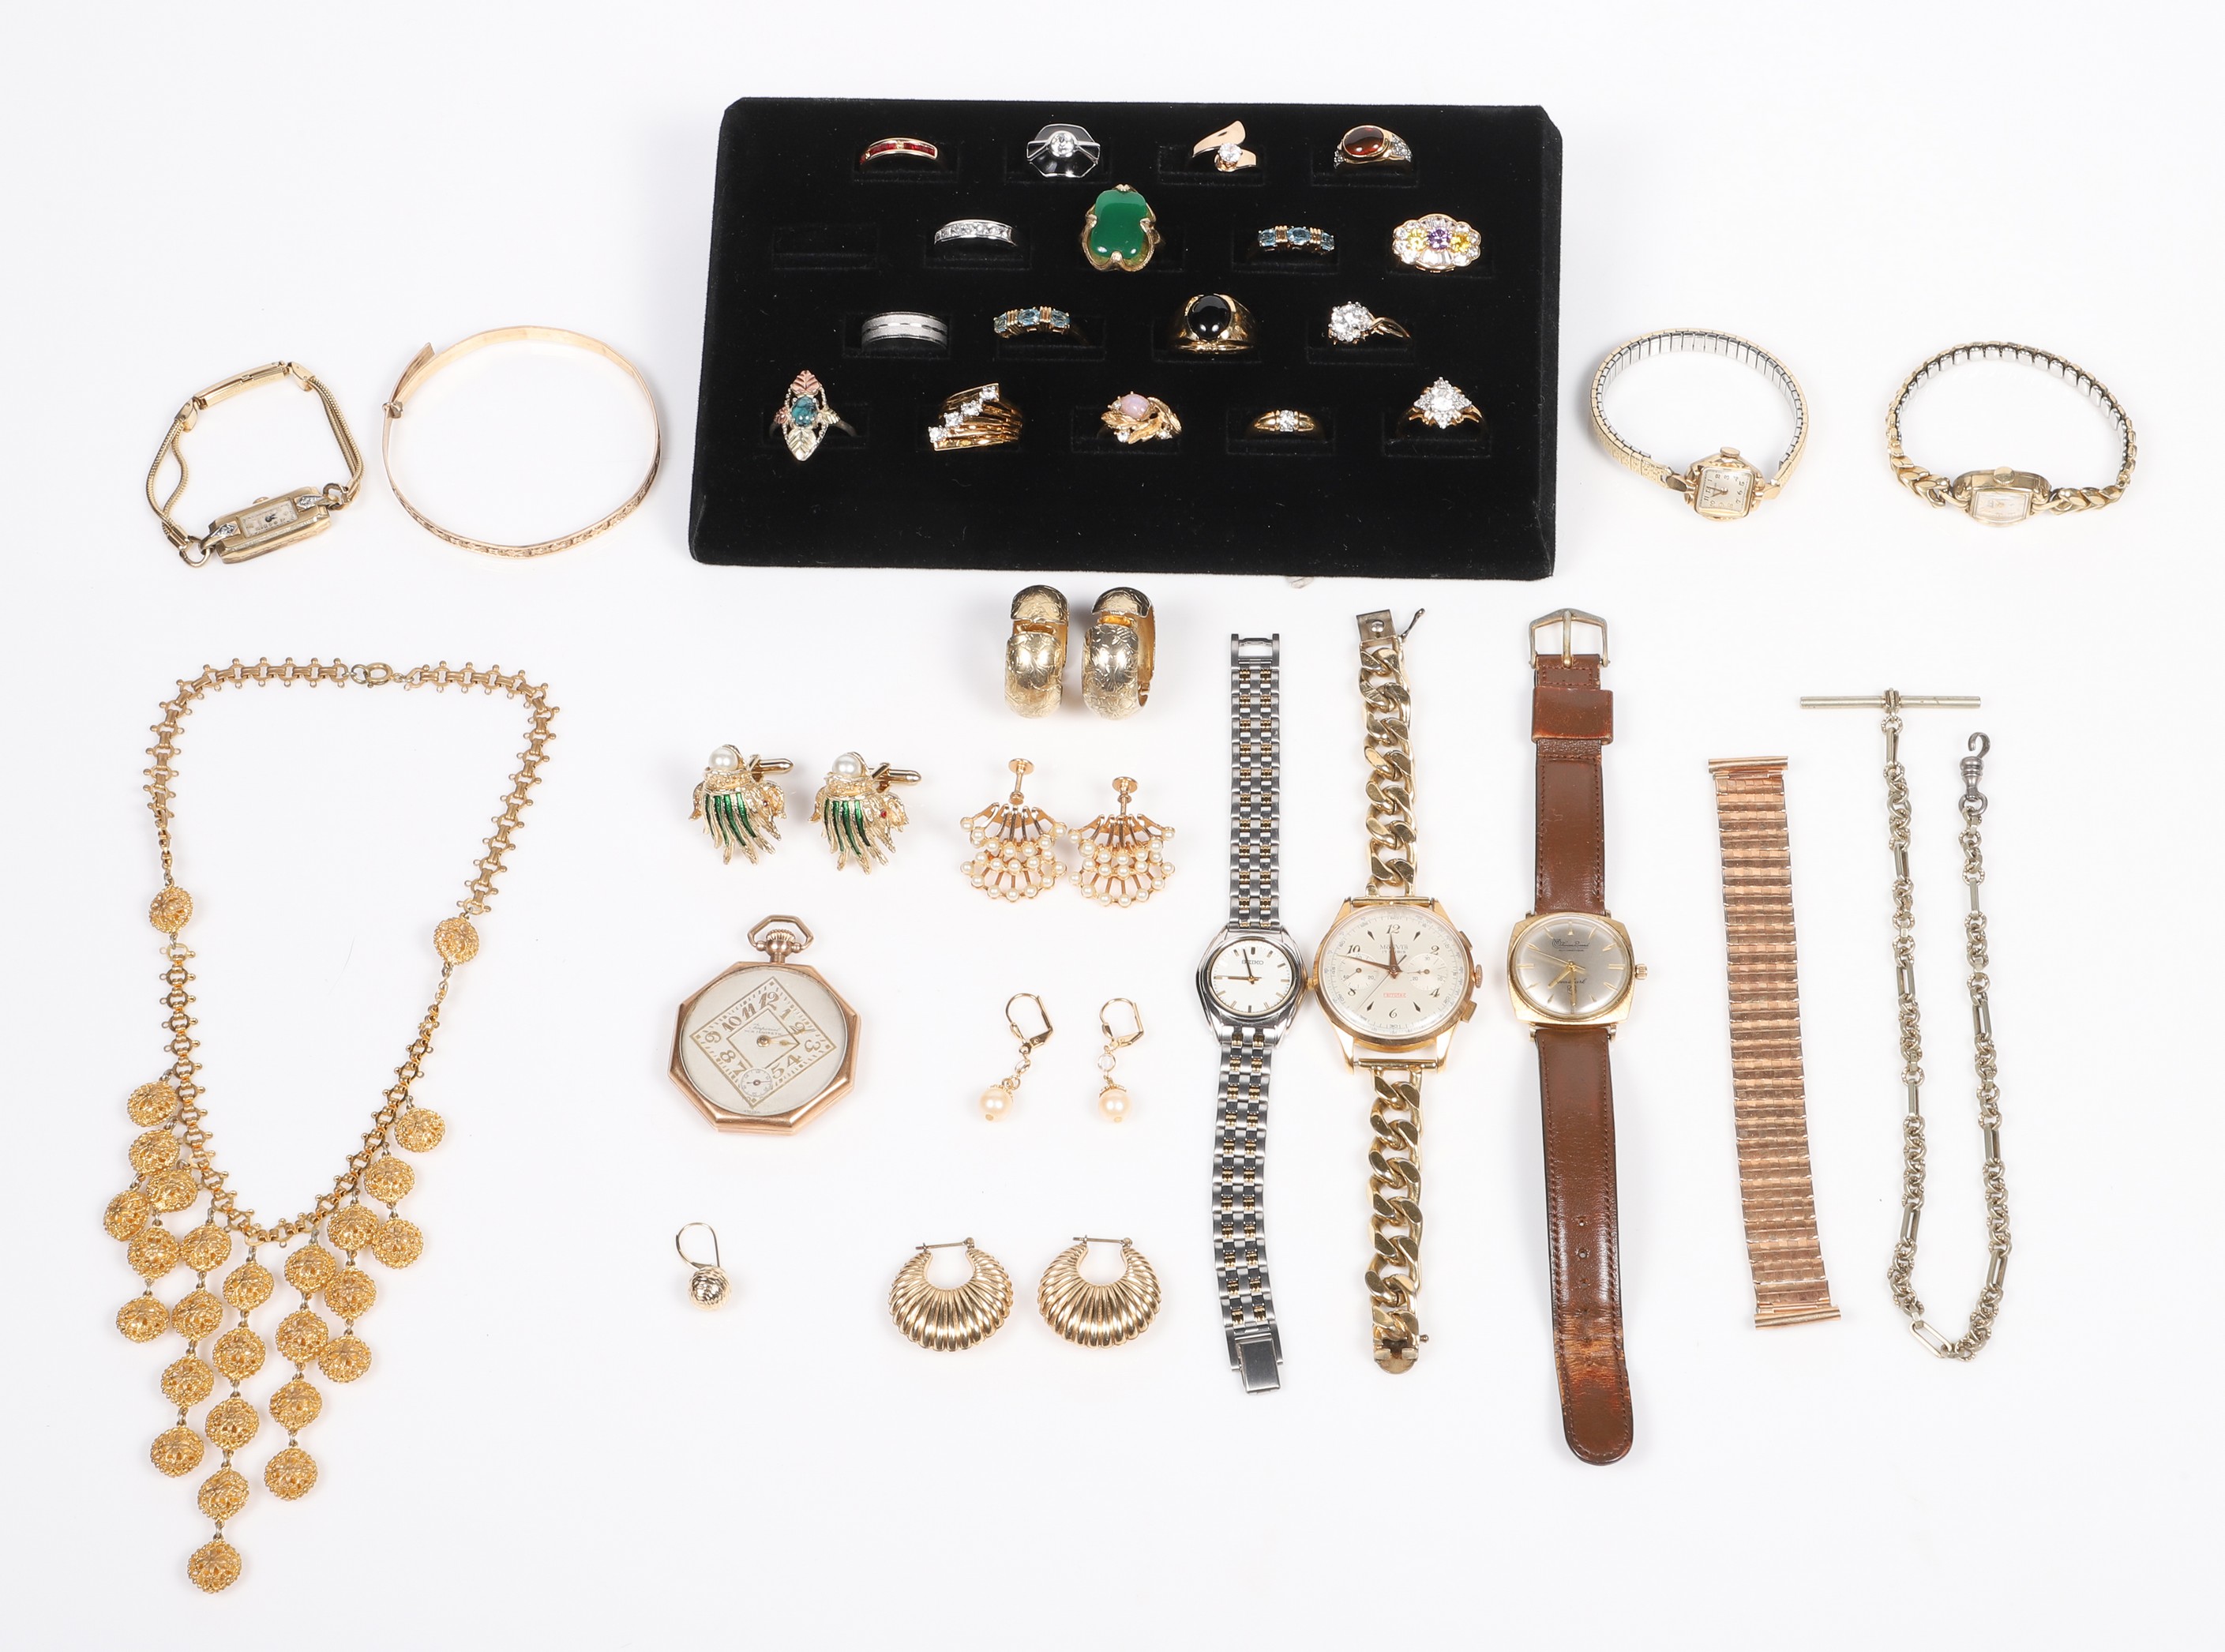 Costume jewelry and vintage watch 2e16fa